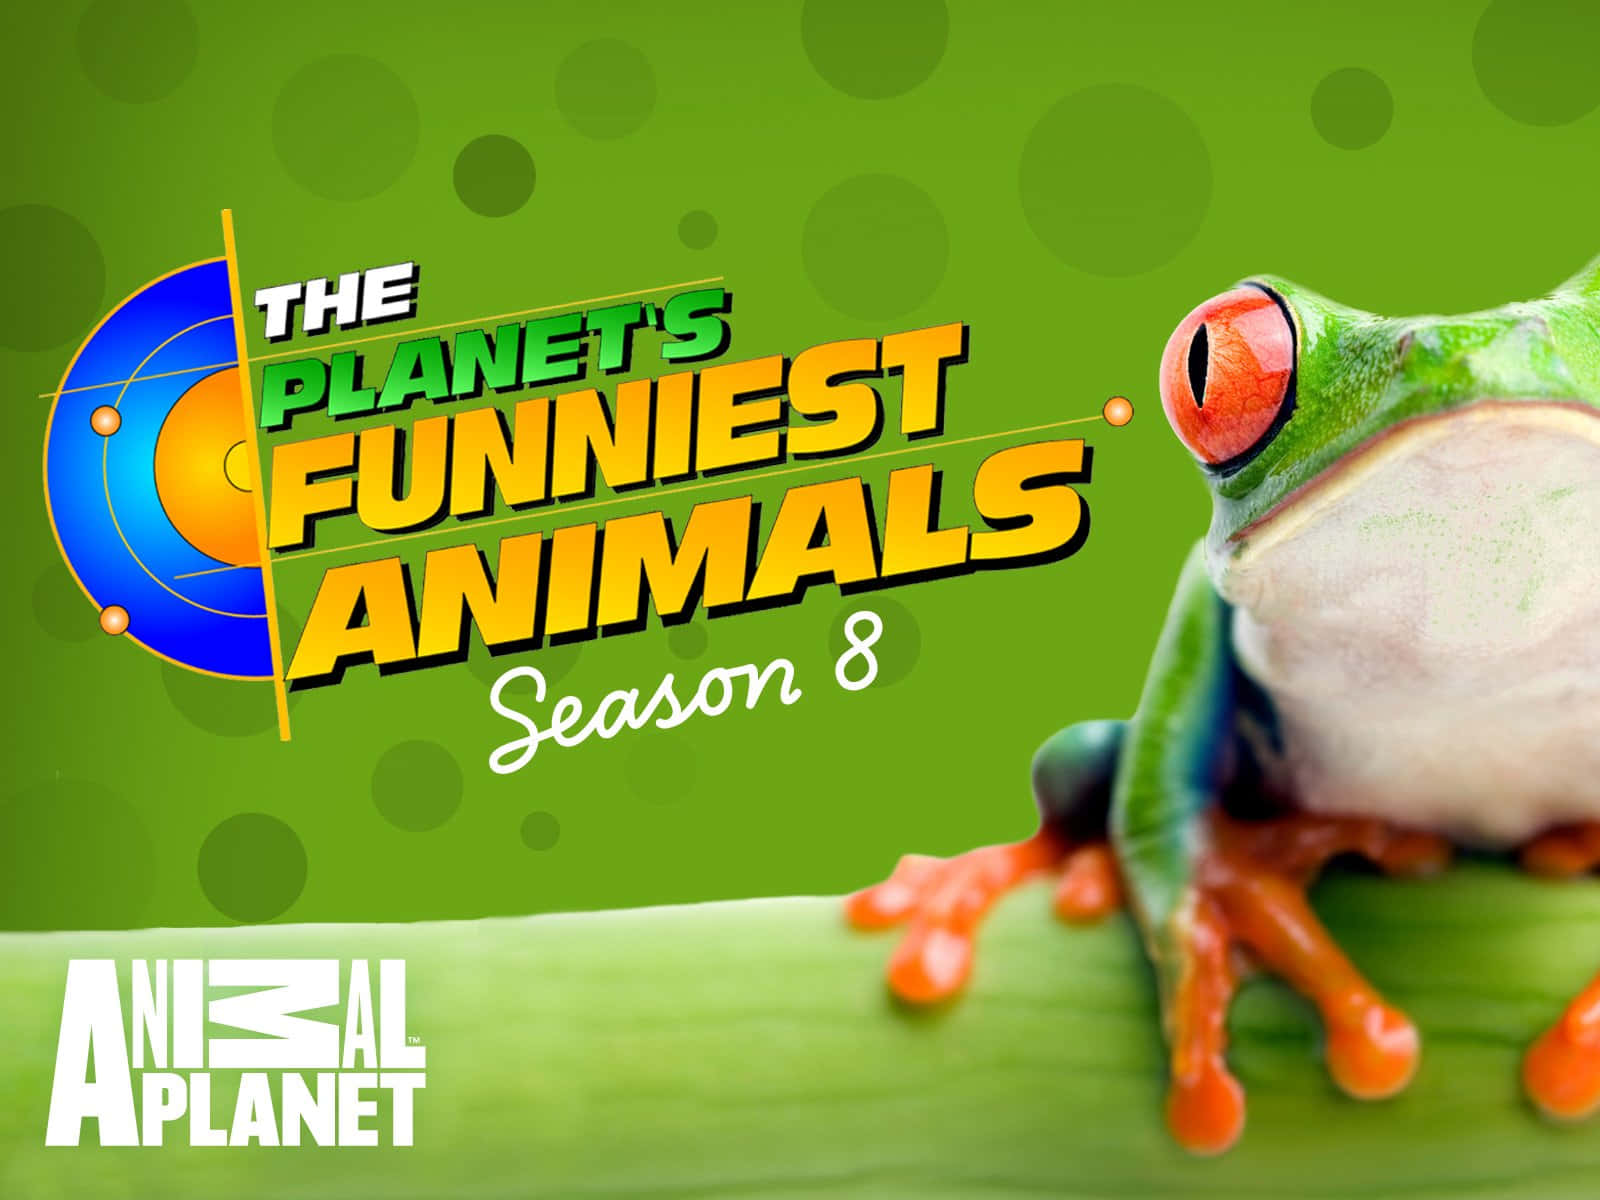 Explore the wonderful world of animals with Animal Planet